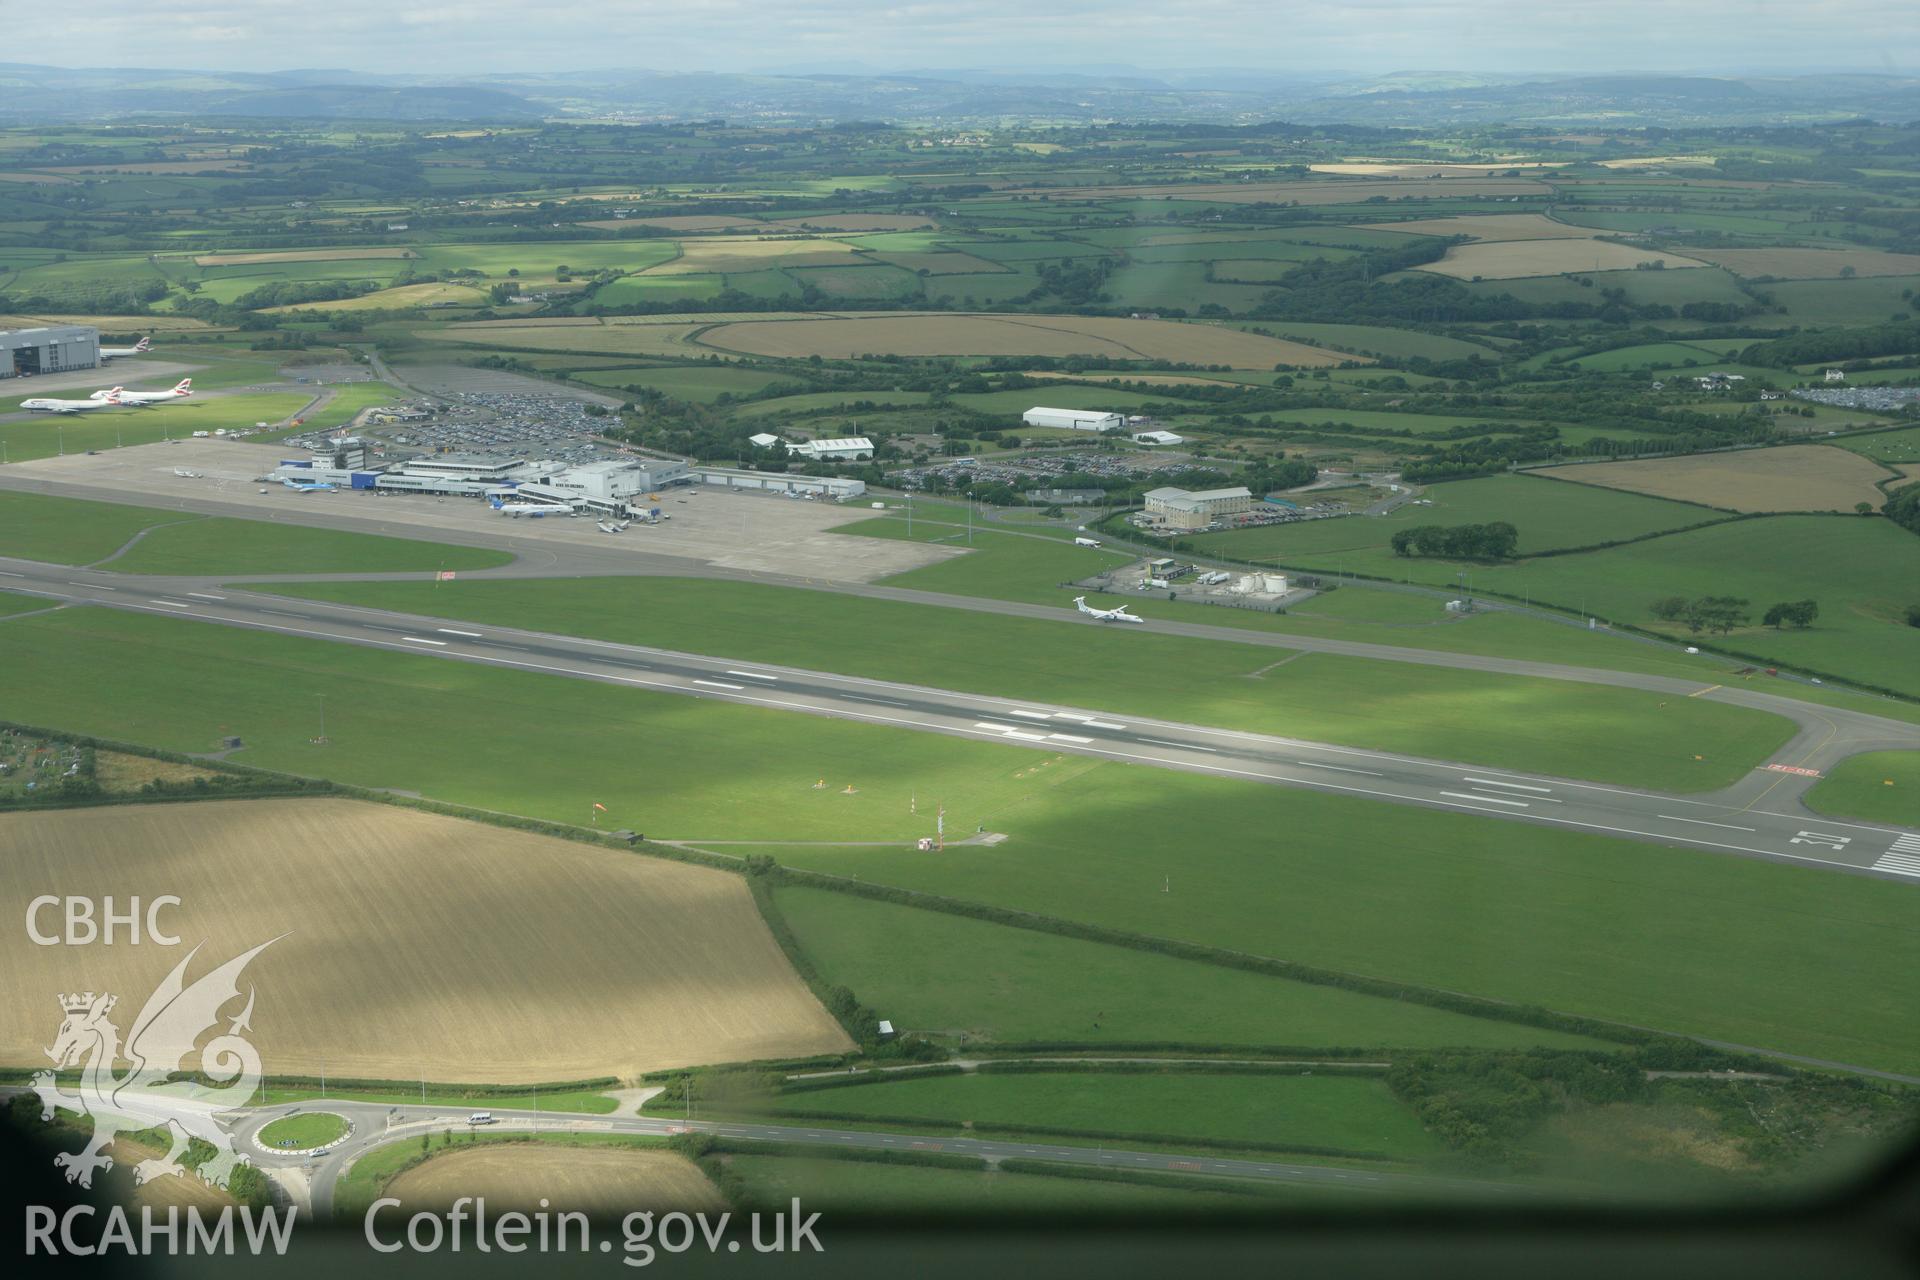 RCAHMW colour oblique photograph of Rhoose Airfield (Cardiff Wales Airport, Rhoose). Taken by Toby Driver on 29/07/2010.